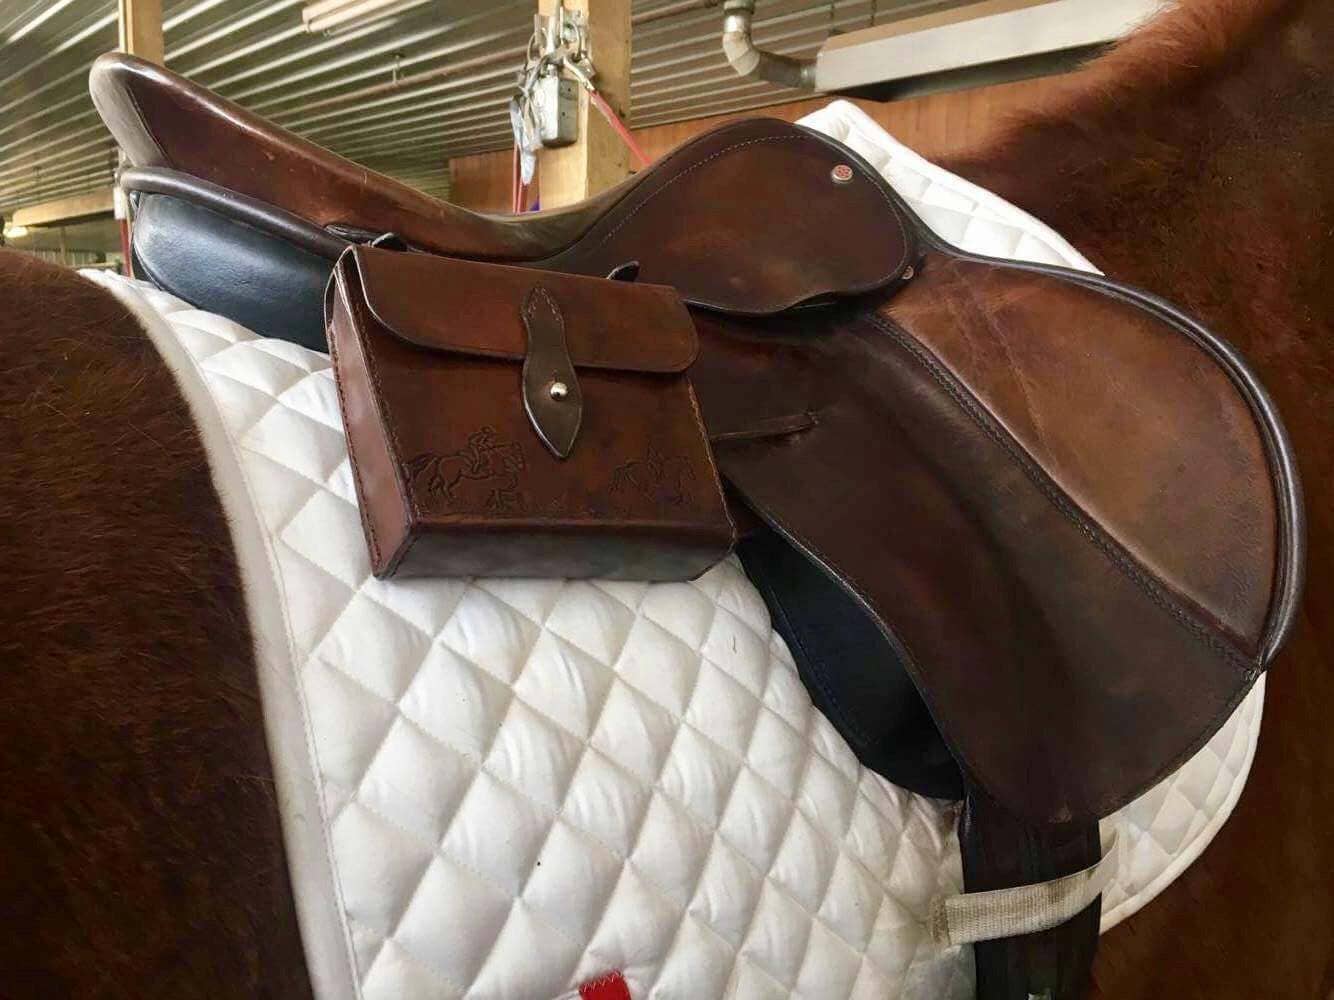 Stylish Saddle Purse for an Effortlessly Chic Look